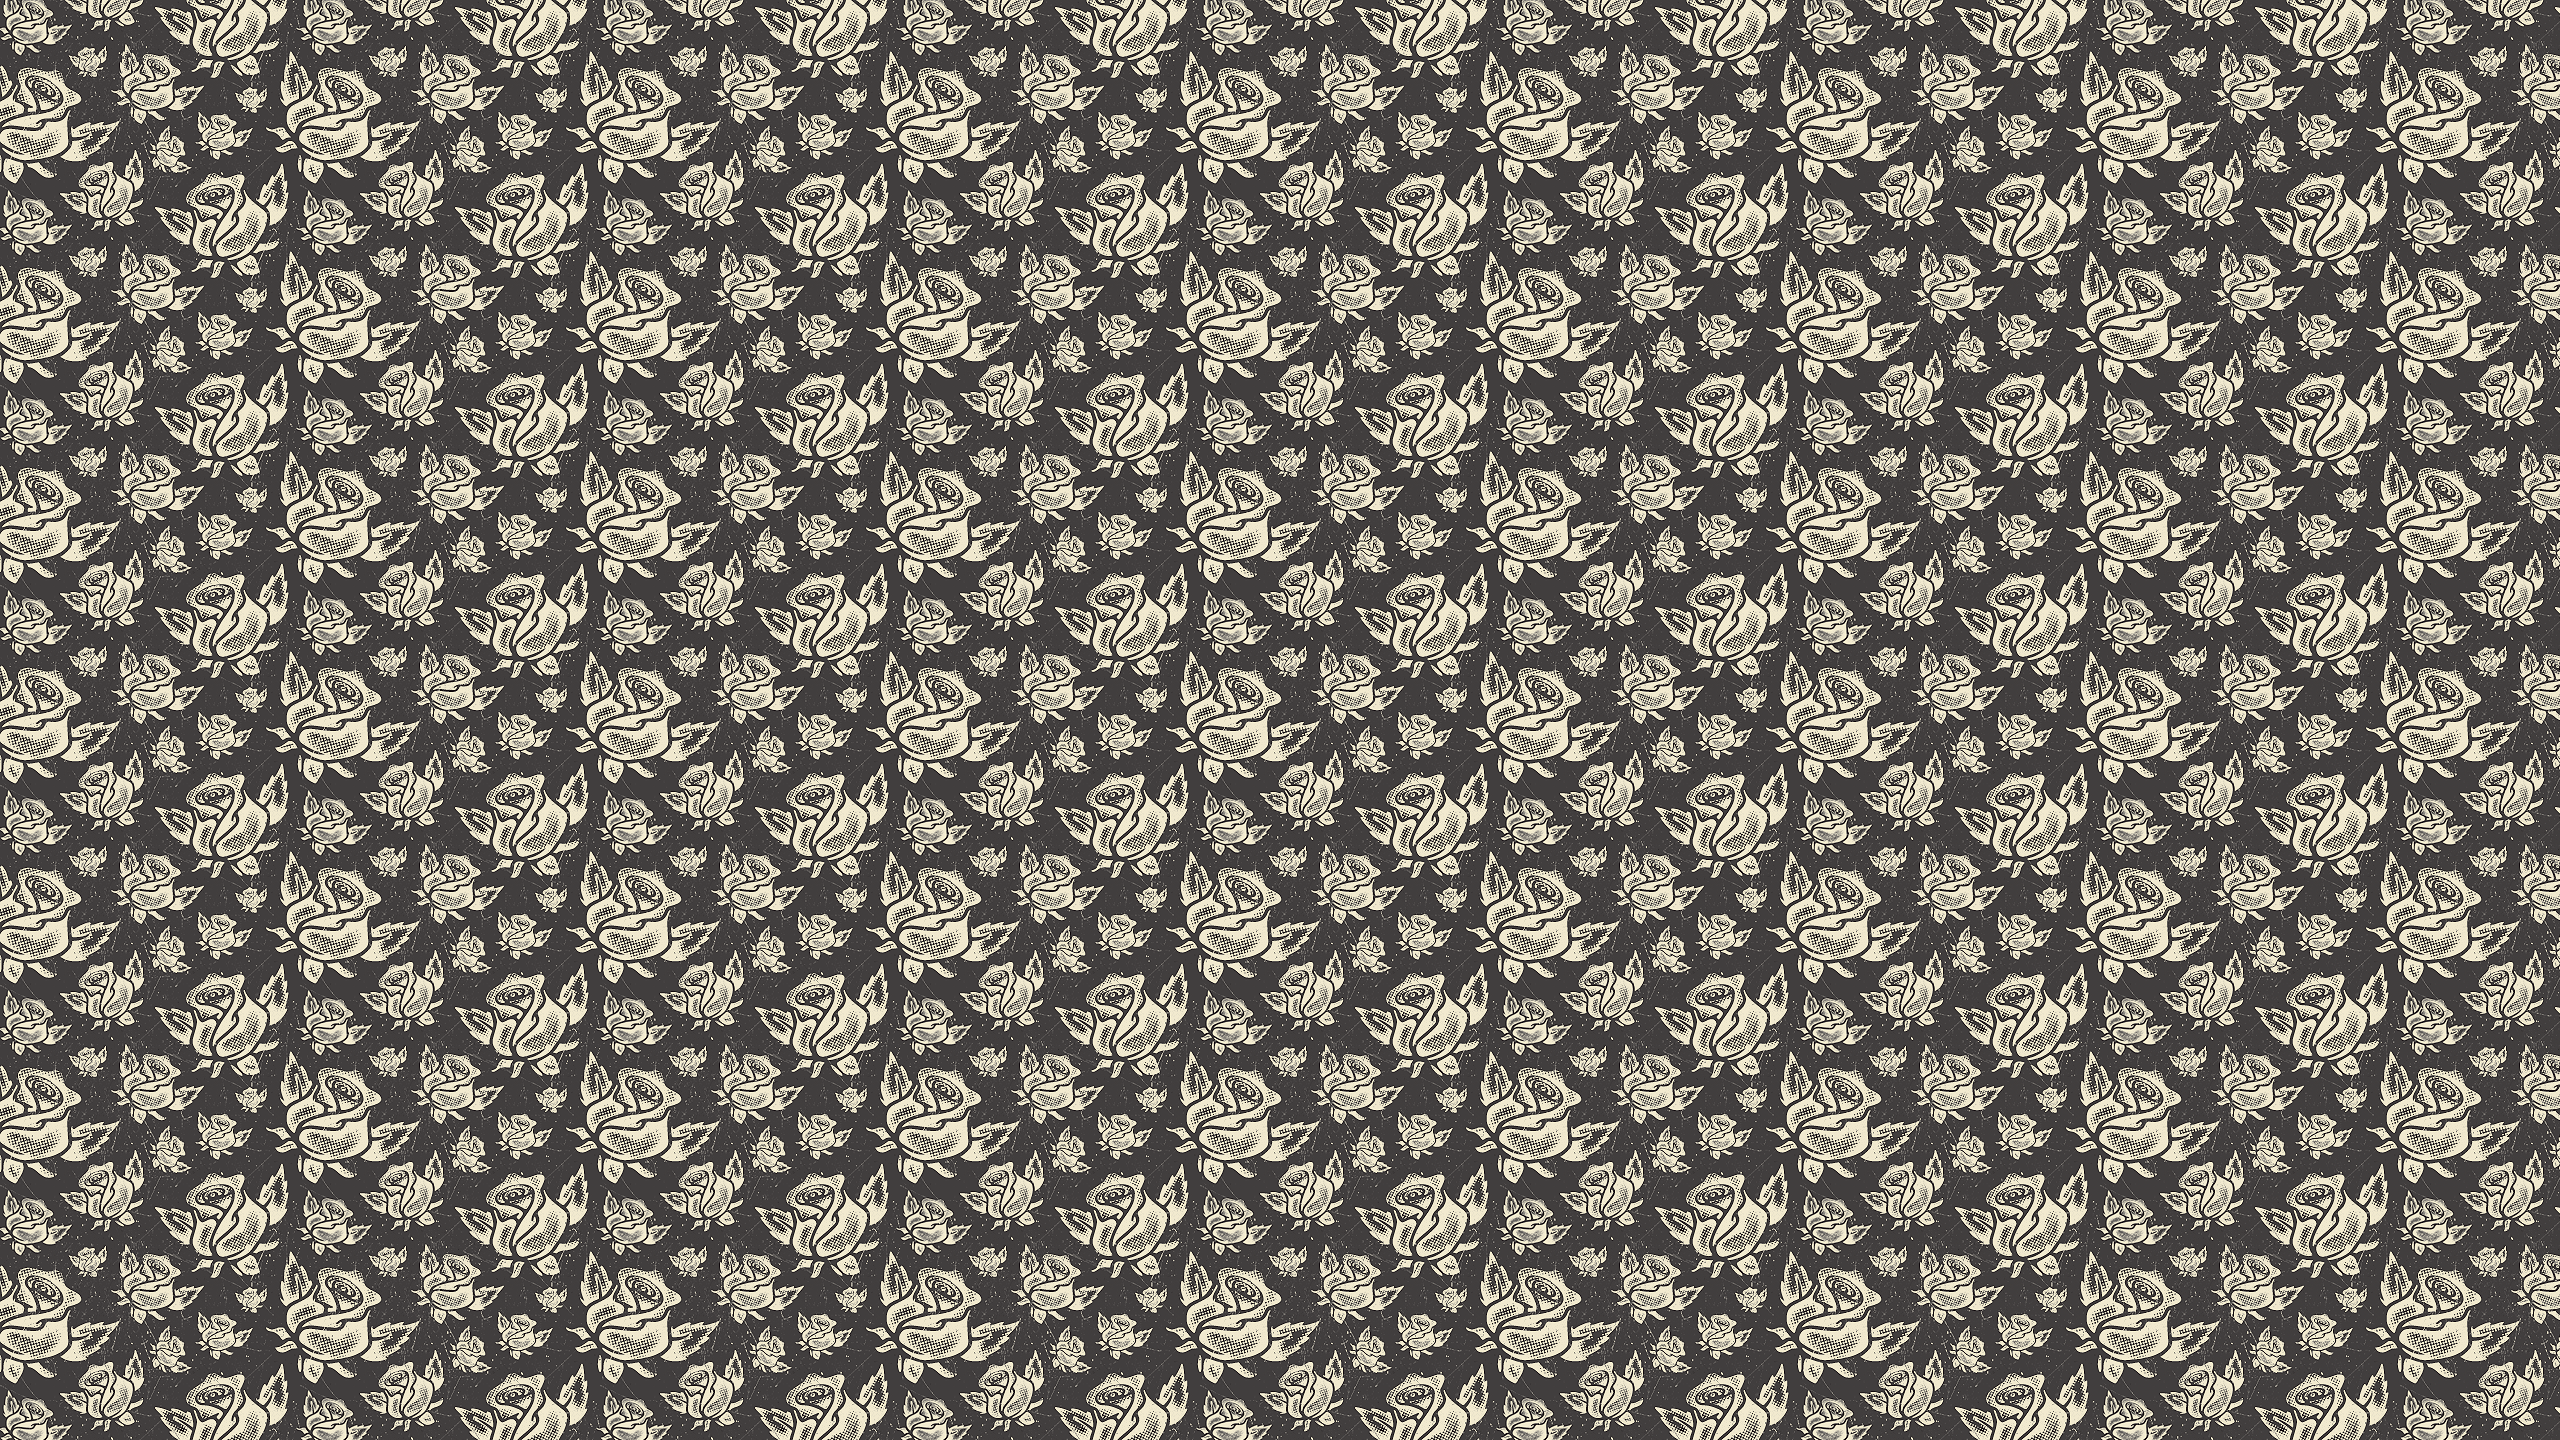 This Vintage Roses Desktop Wallpaper Is Easy Just Save The